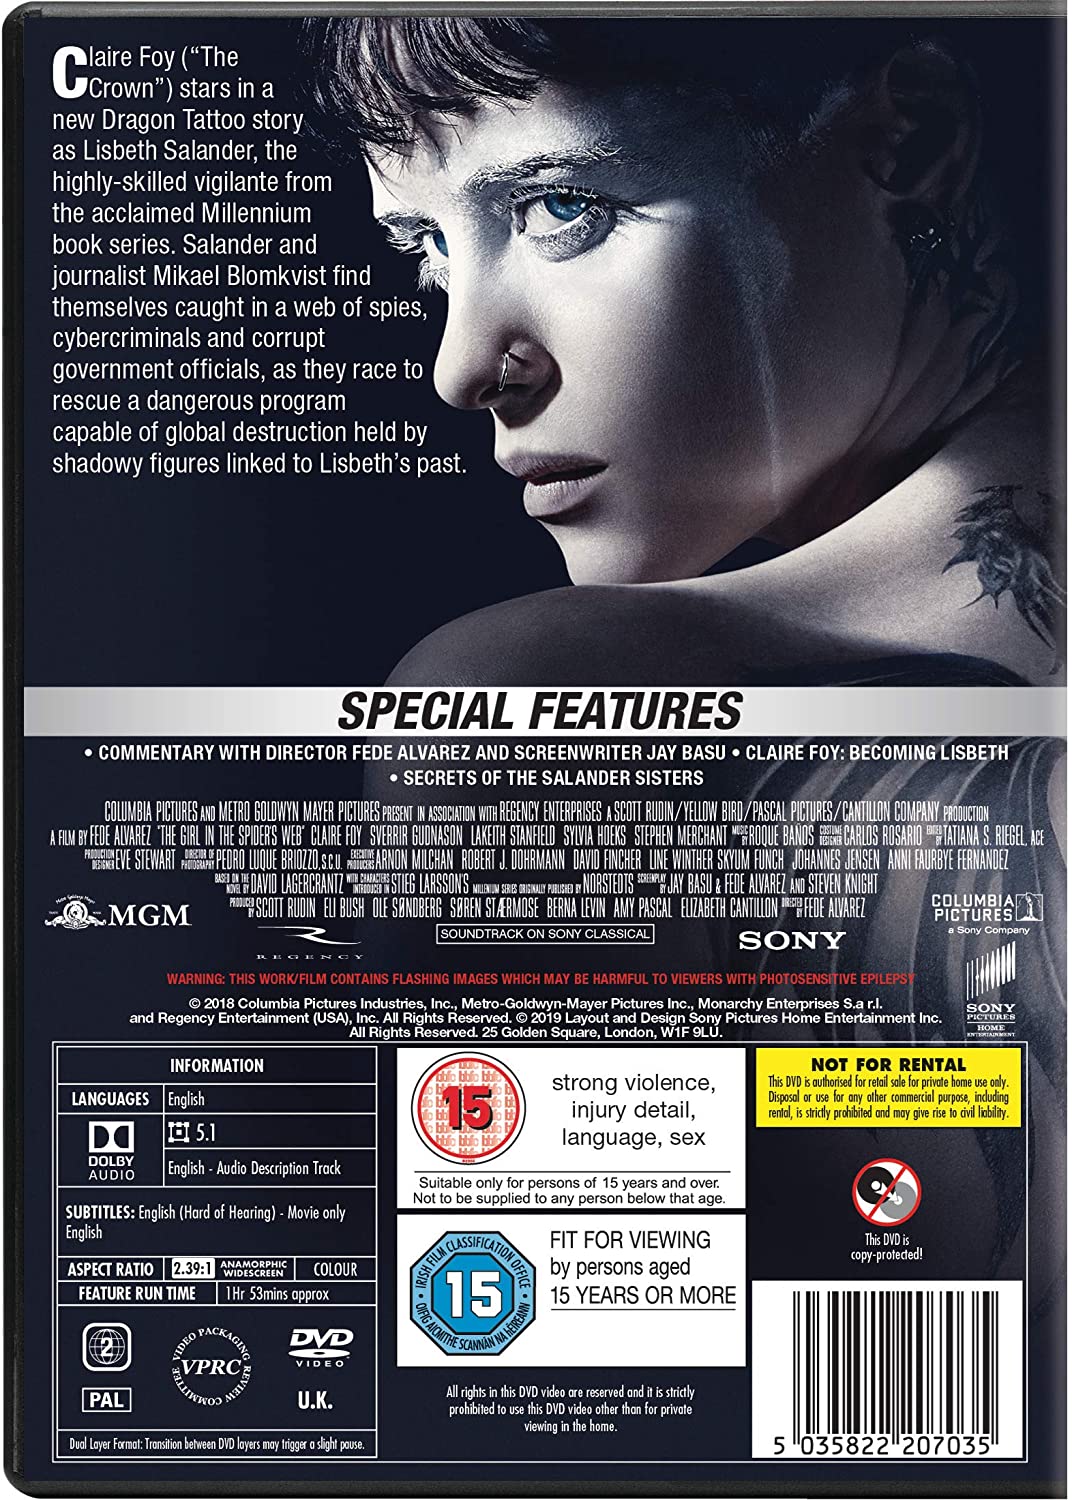 The Girl In The Spider's Web - Action/Thriller [DVD]